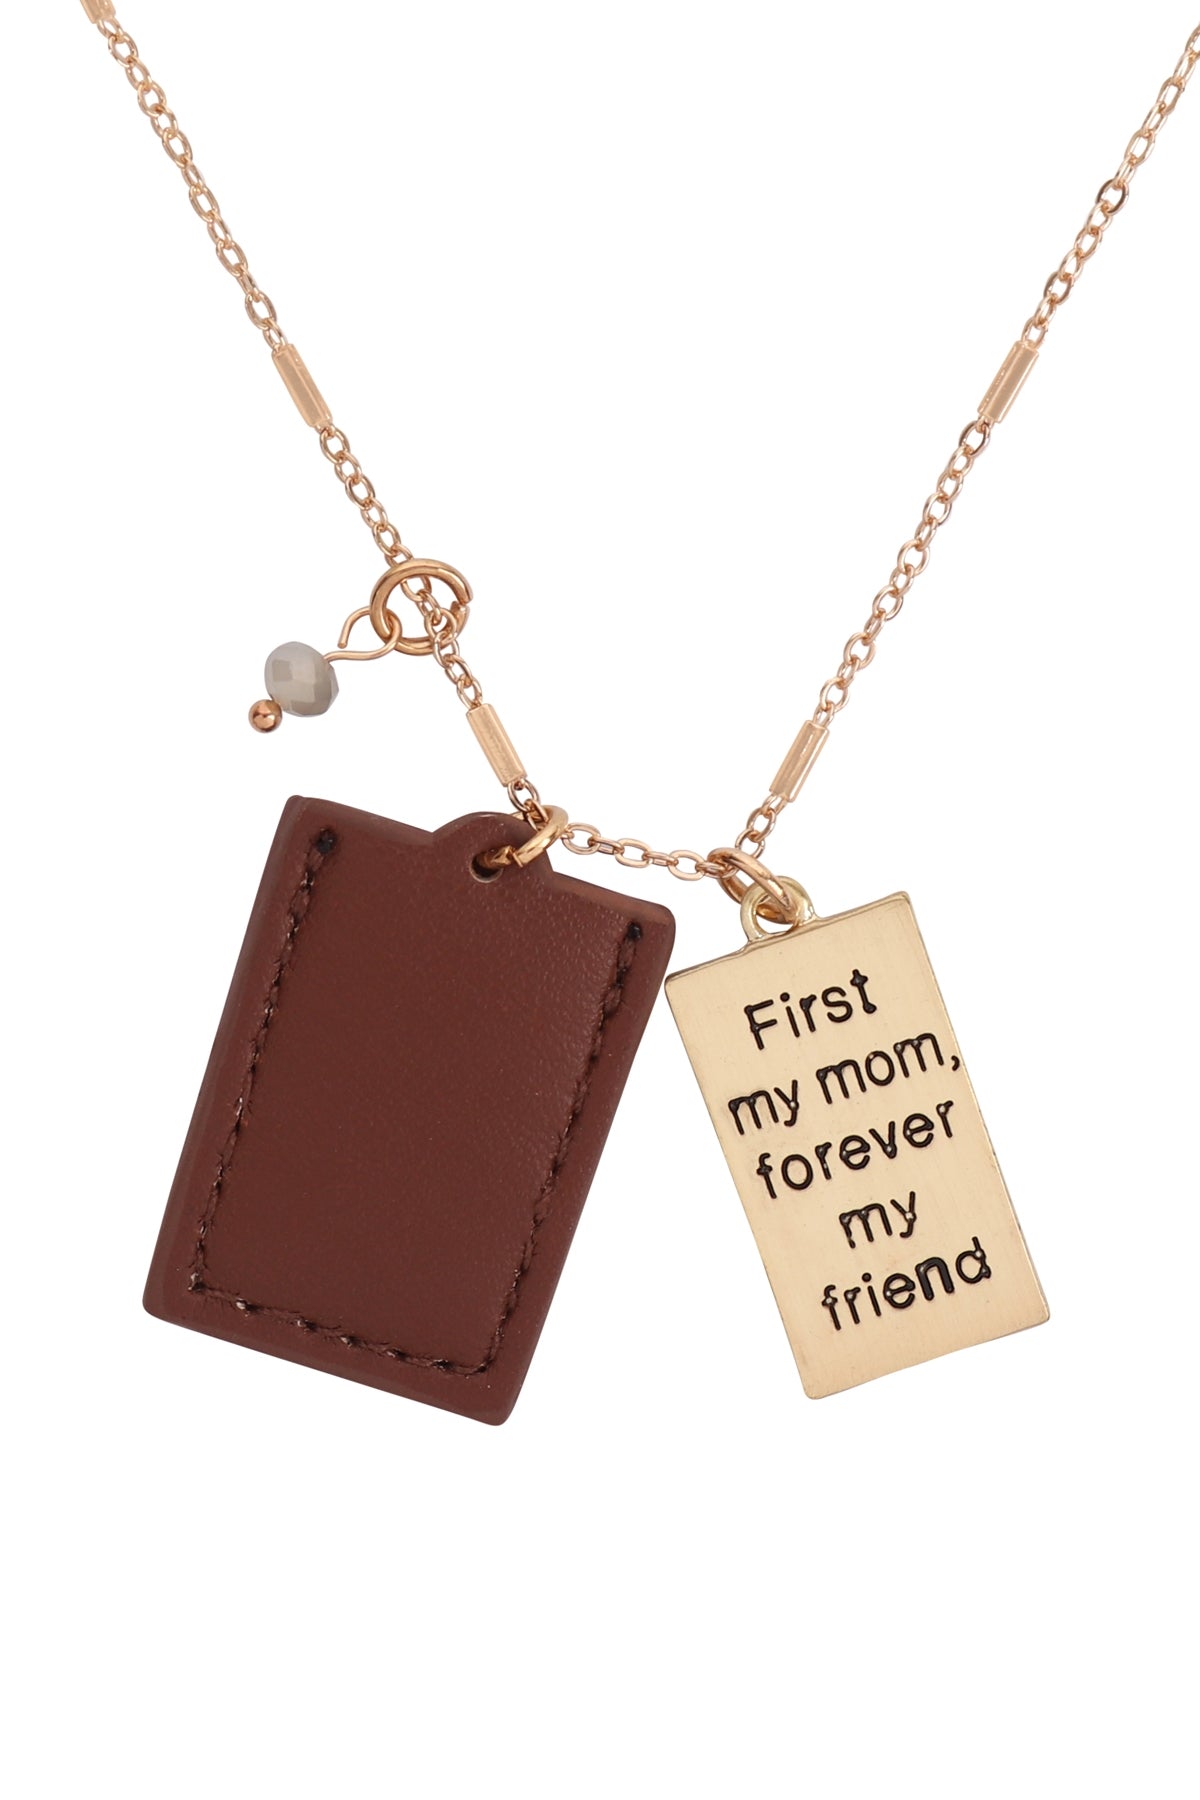 BEAR ENGRAVED PLATE POCKET NECKLACE  (NOW $1.00 ONLY!)